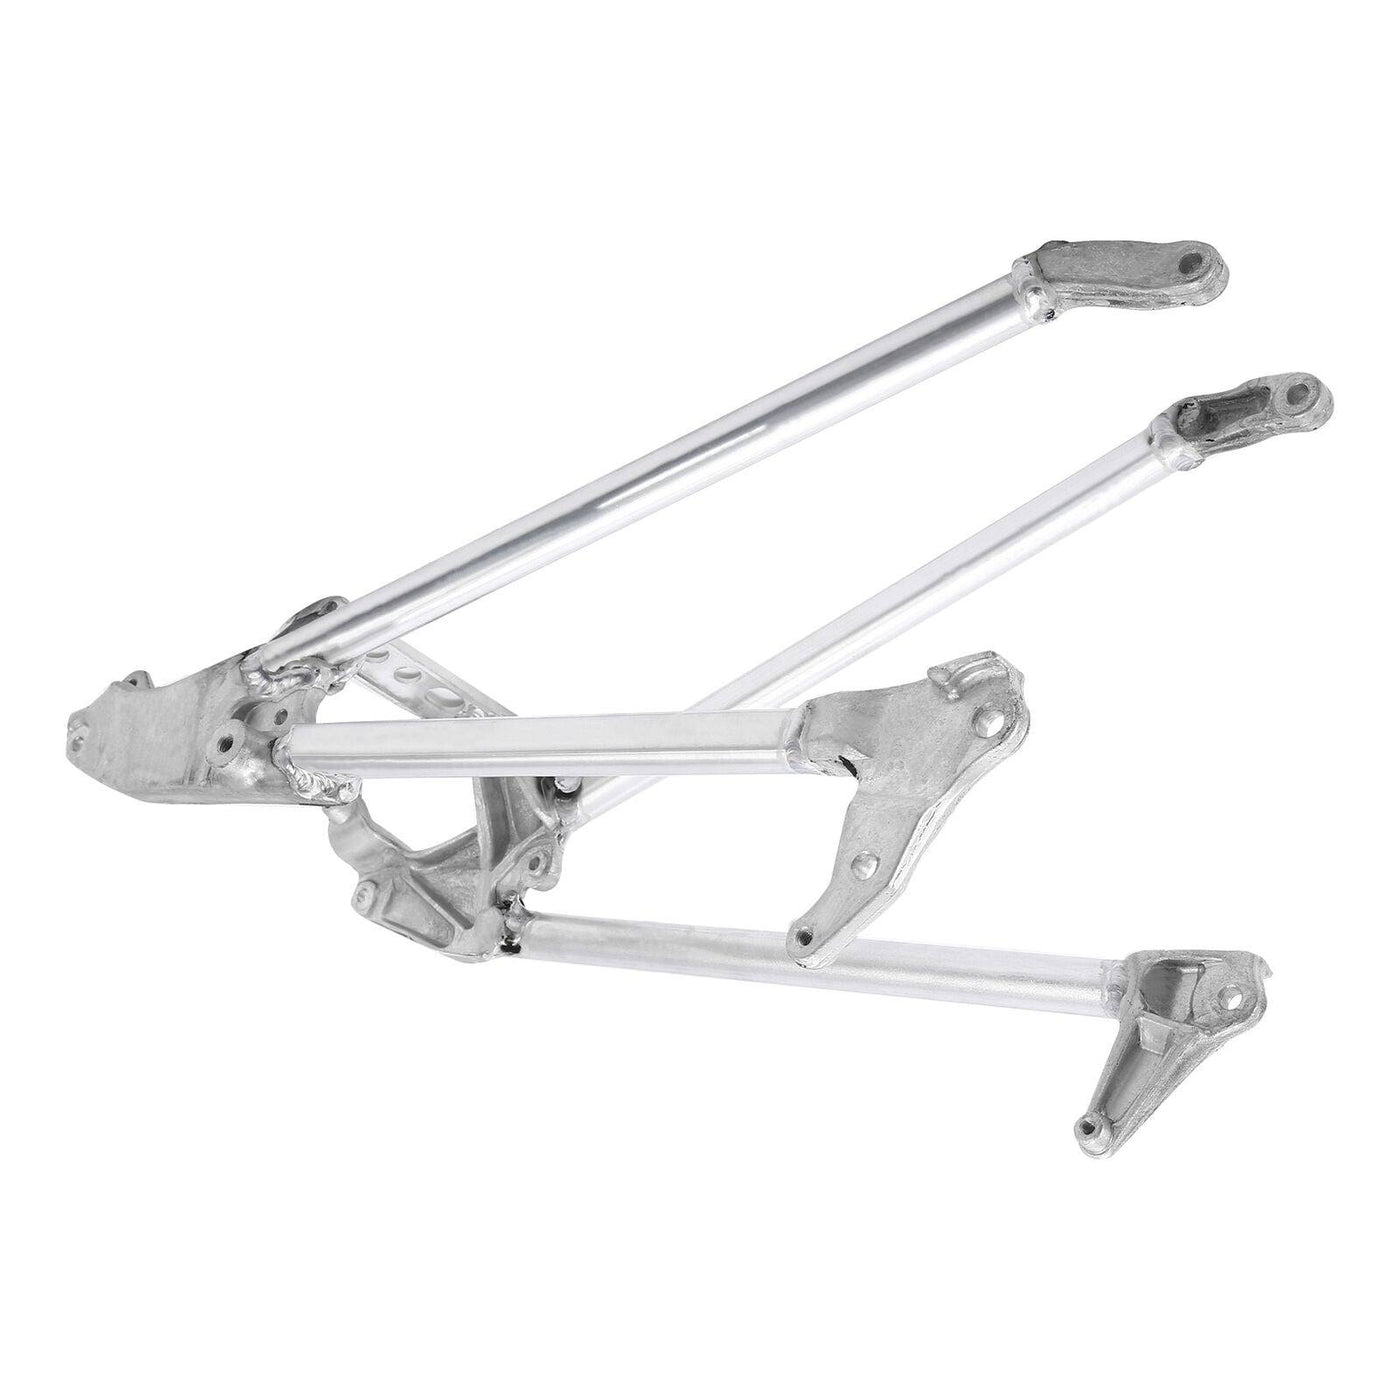 Subframe Rear Chassis Support Bracket Fit For Honda CRF450R CRF250R 2009-2010 - Moto Life Products